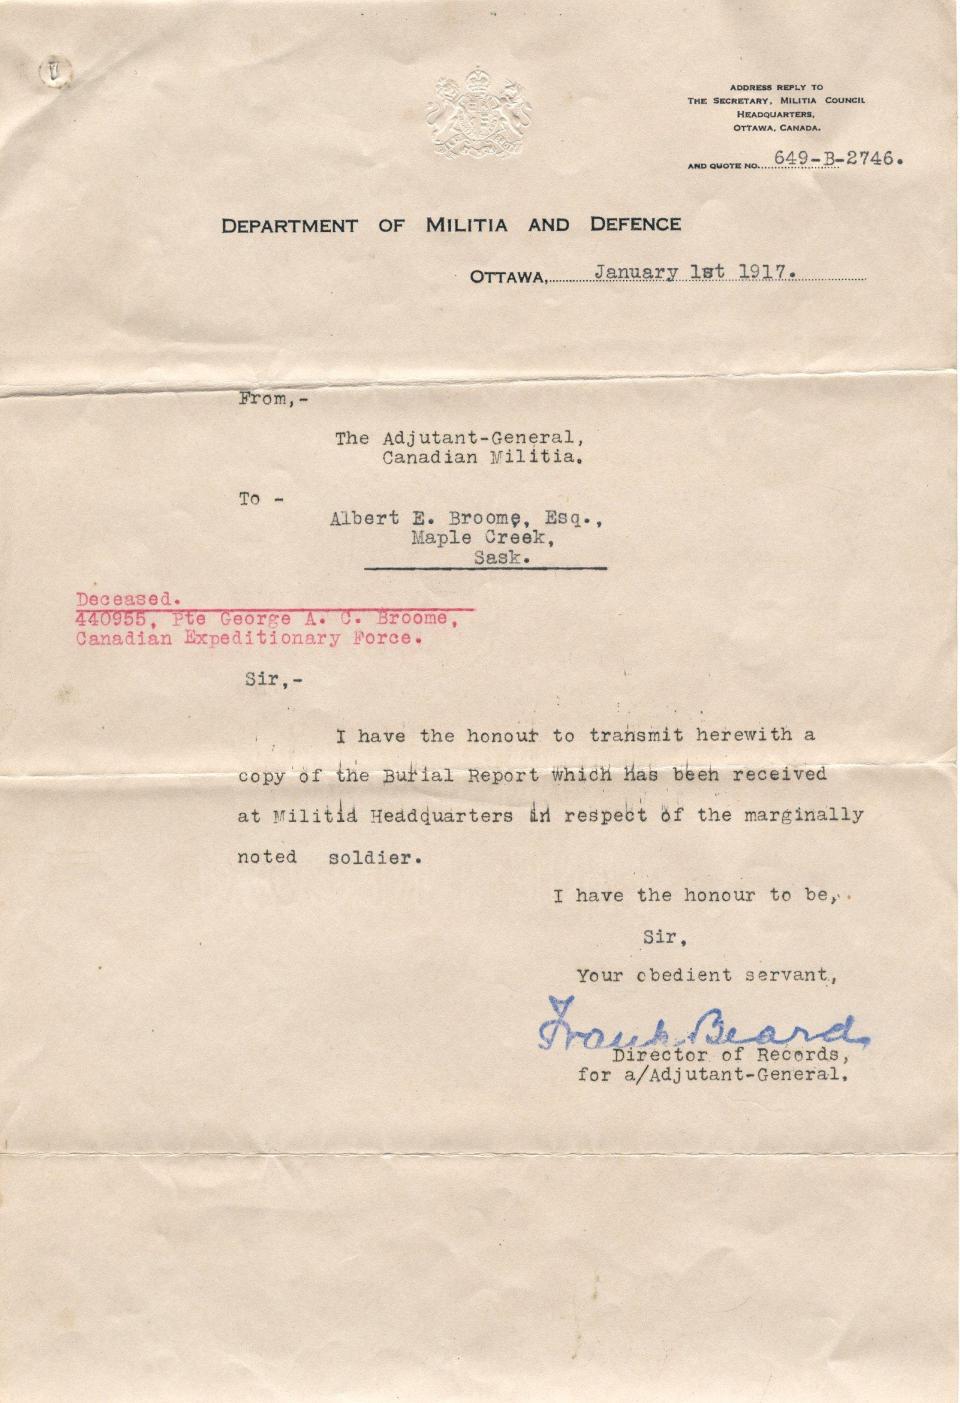 Letter from 
Department of Militia and Defence
of Burial Report
Jan. 1, 1917